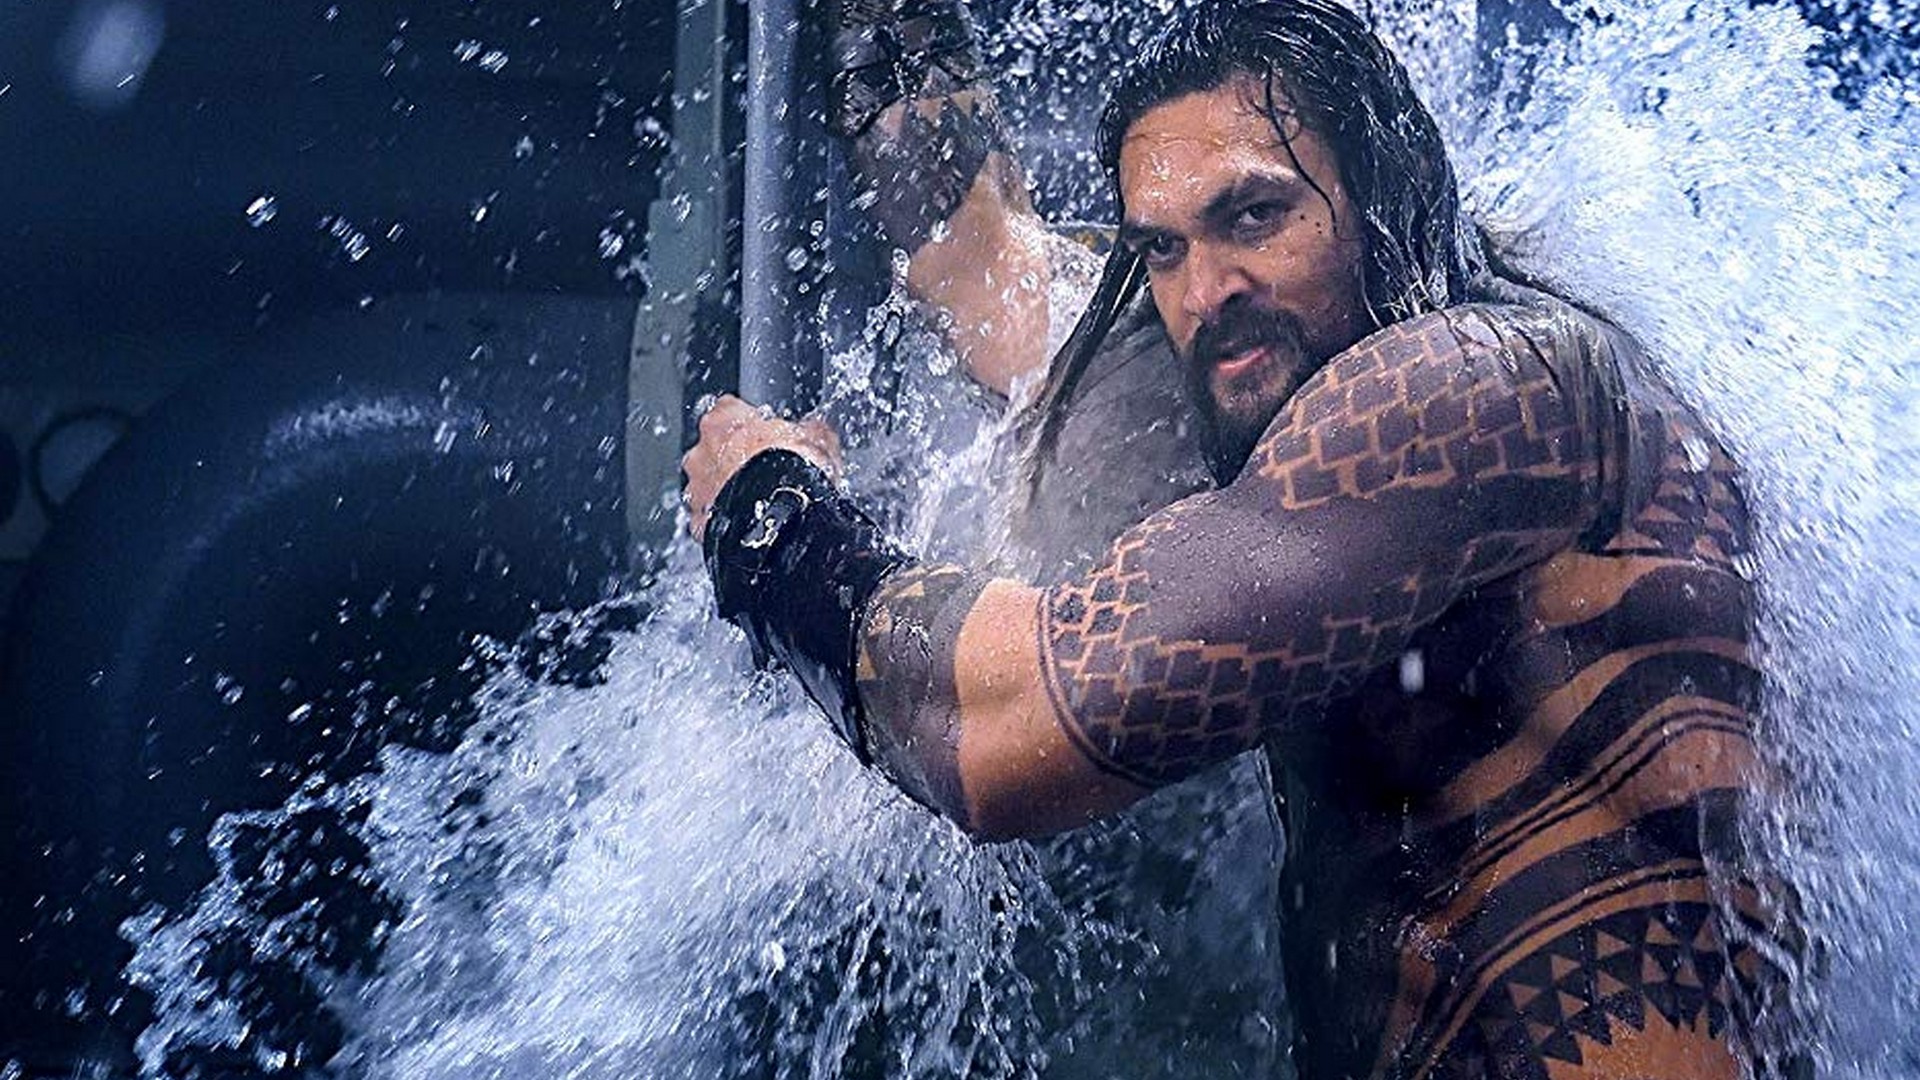 Best Aquaman Wallpaper HD with image resolution 1920x1080 pixel. You can make this wallpaper for your Desktop Computer Backgrounds, Mac Wallpapers, Android Lock screen or iPhone Screensavers